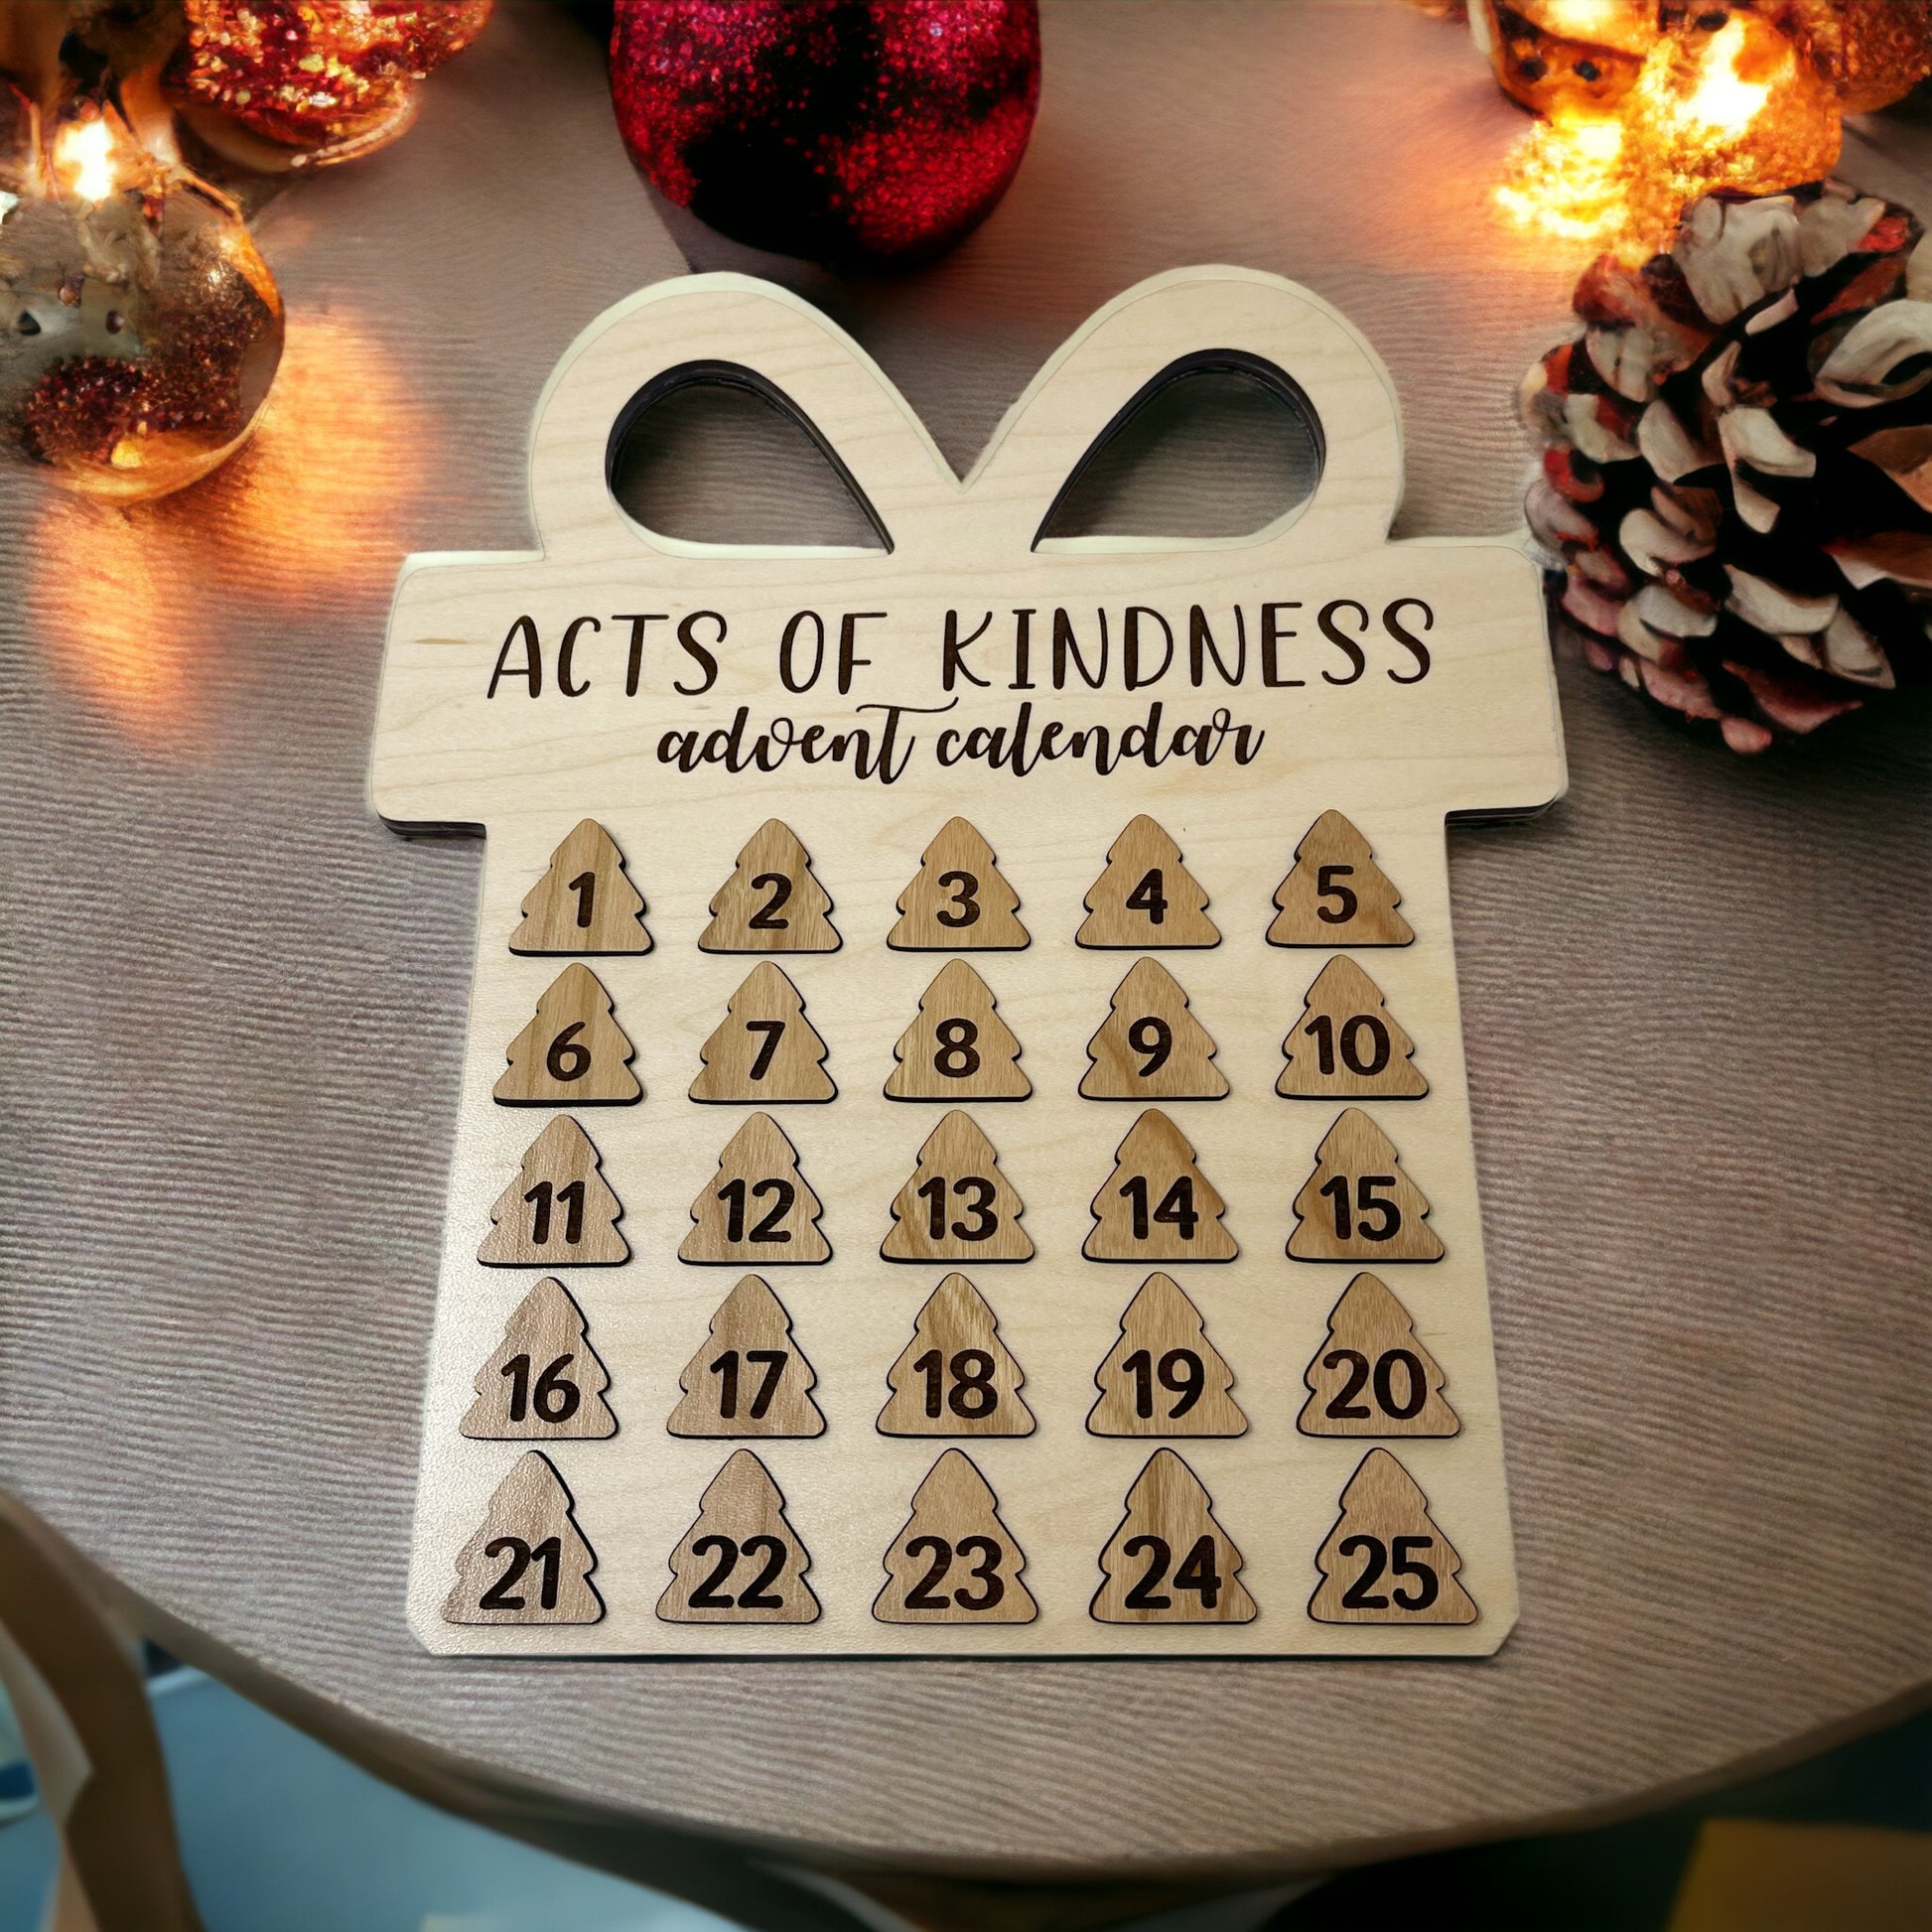 Christmas Advent Calendars - Acts of Kindness Countdown Calendar, Christmas Activities for Families, Activity Calendar, Kids Advent Calendar